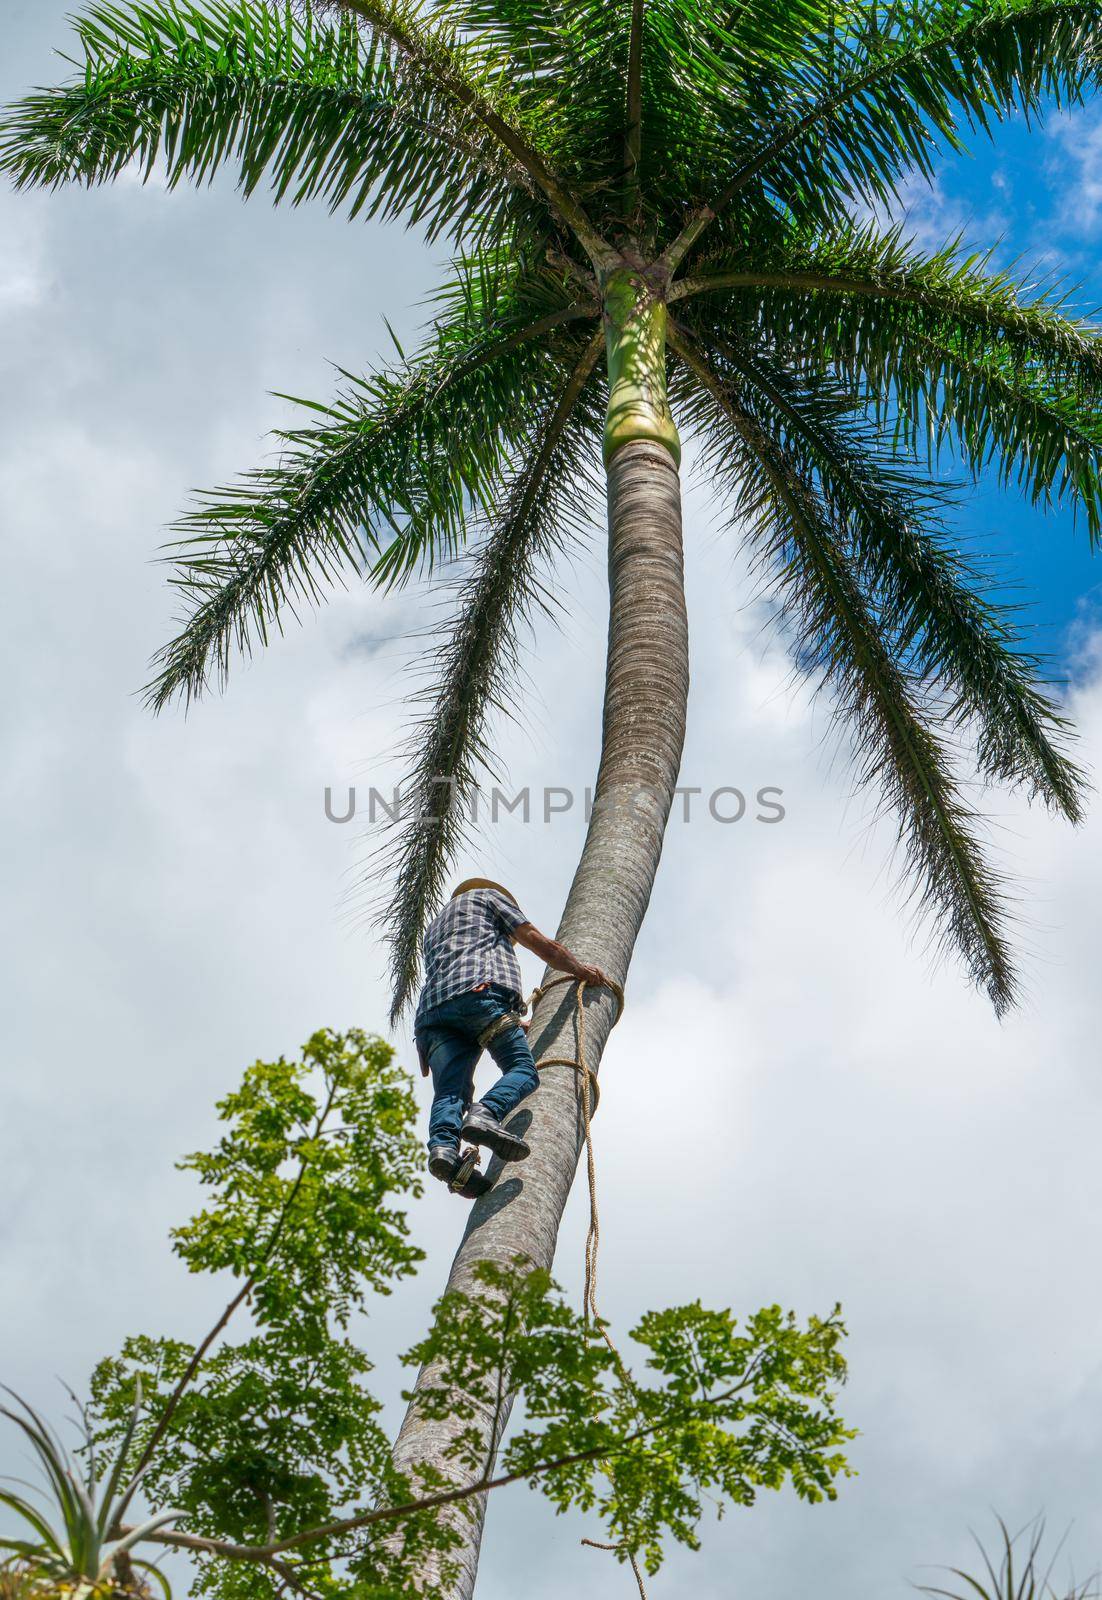 Adult male climbs tall coconut tree with rope to get coco nuts. Harvesting and farmer work in caribbean countries